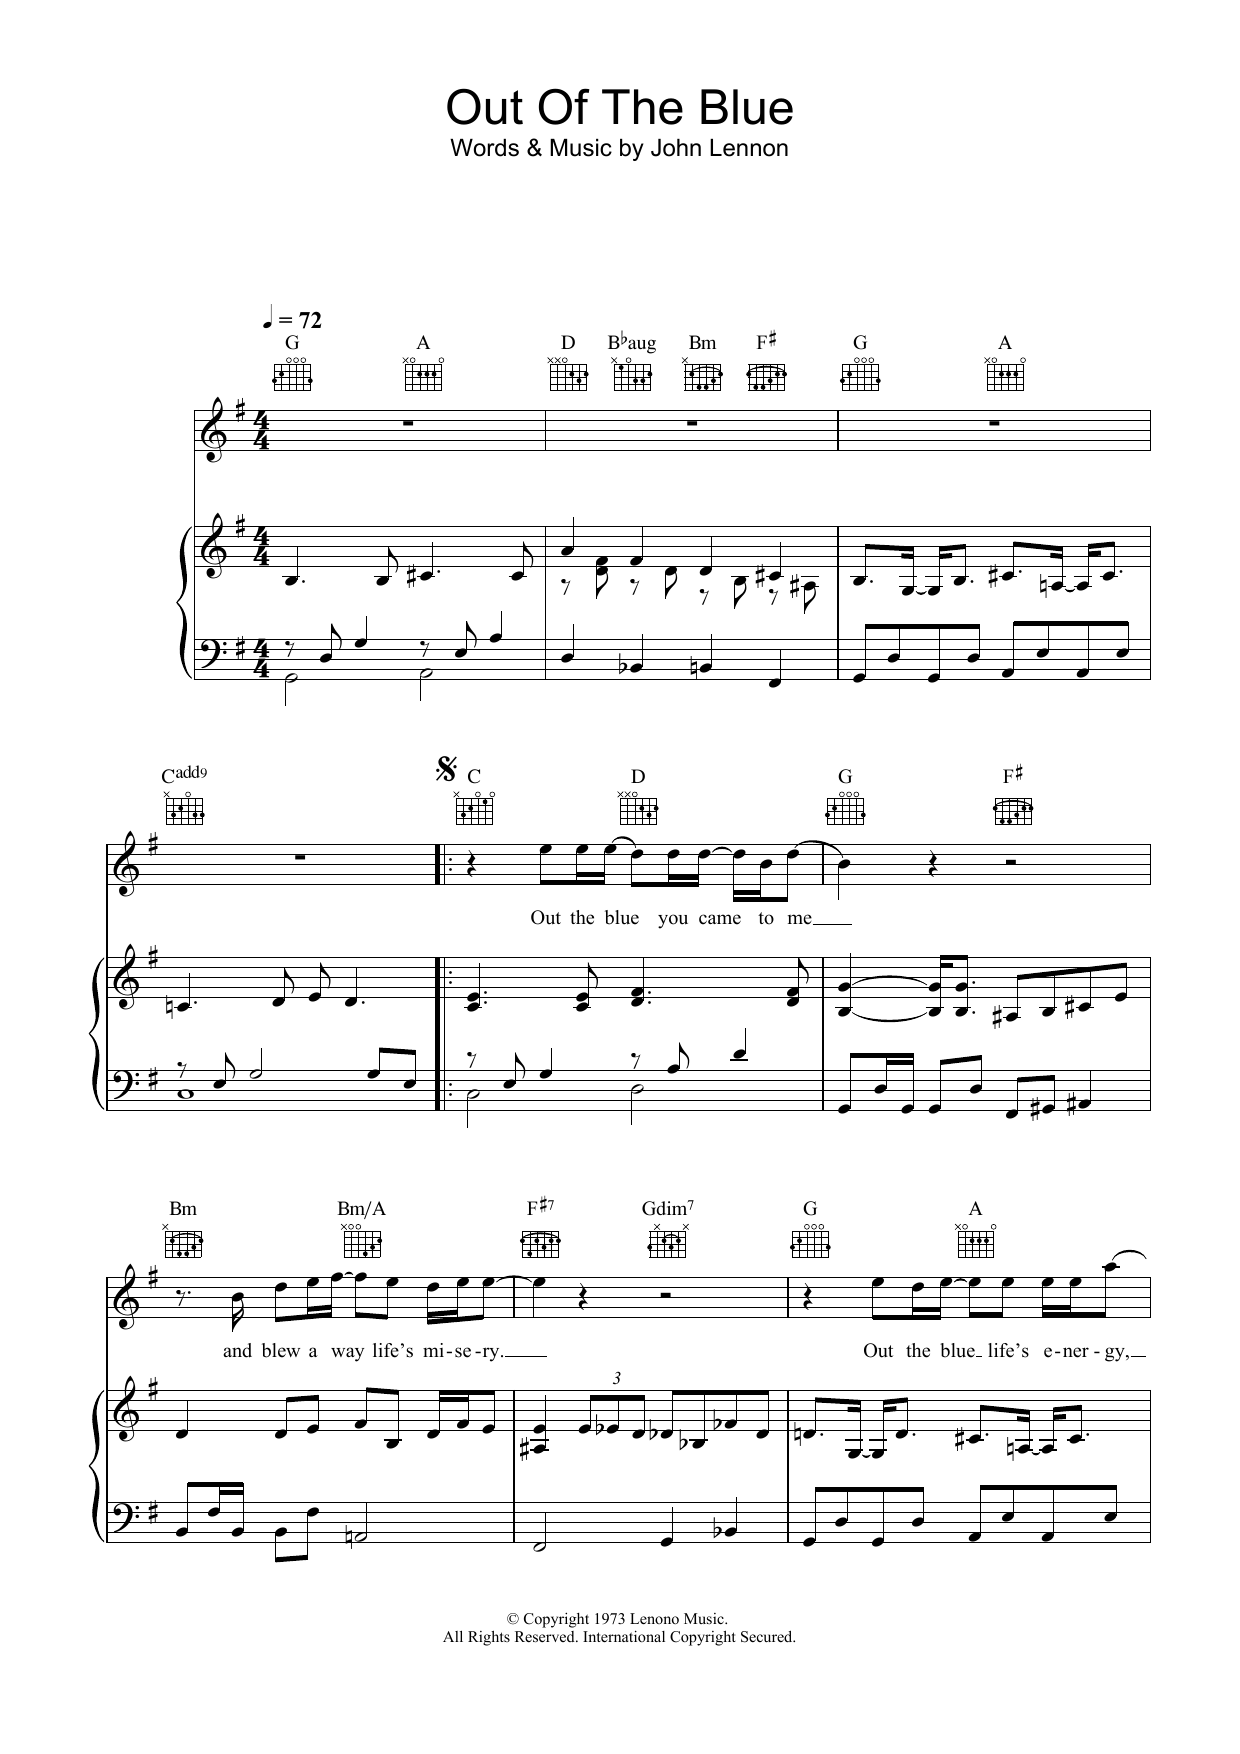 John Lennon Out The Blue sheet music notes and chords. Download Printable PDF.